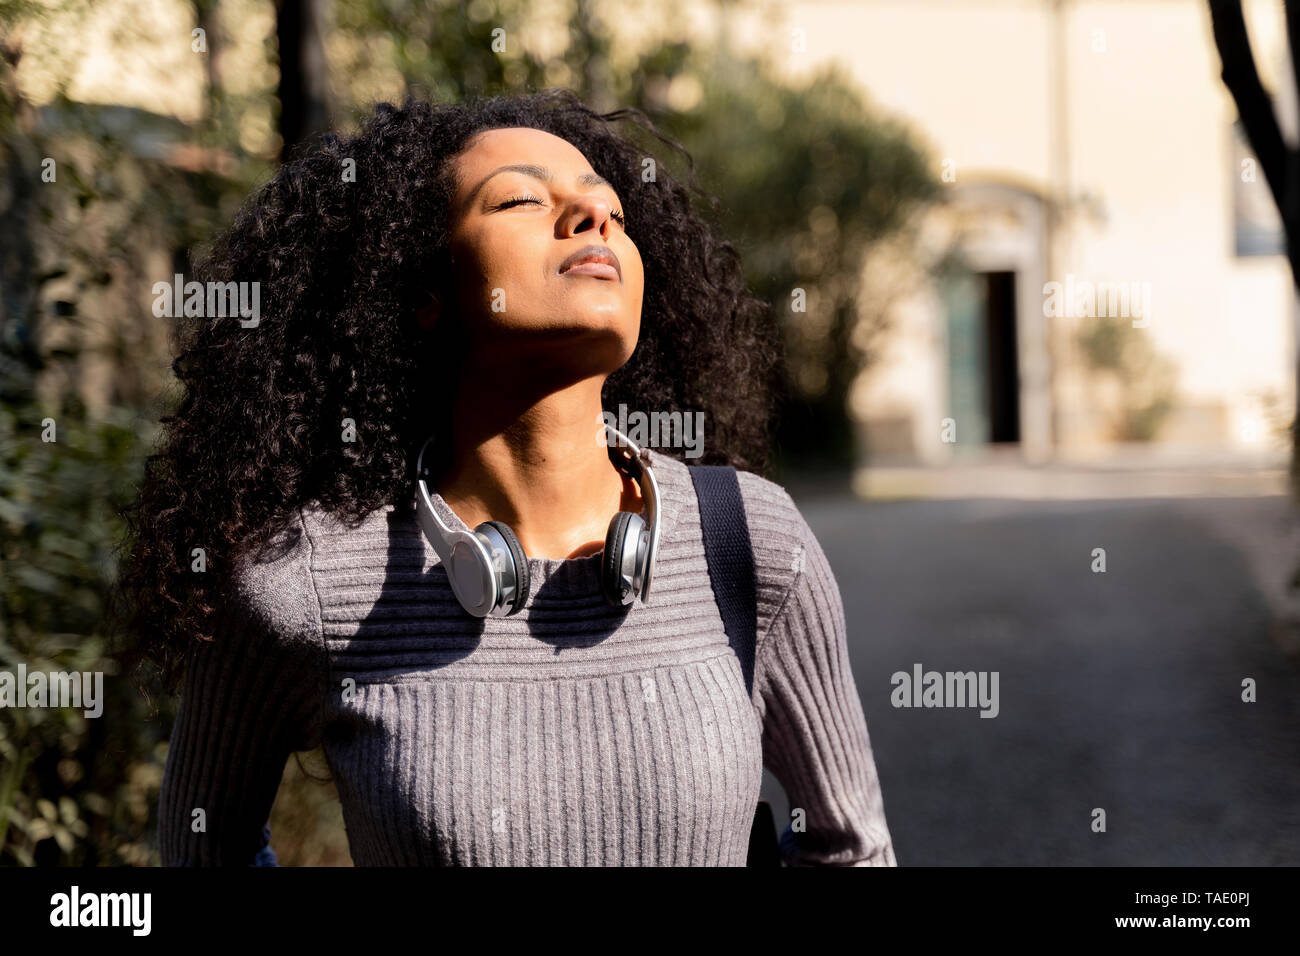 Portrait of a woman with headphones, enjoying the sun with closed eyes Stock Photo